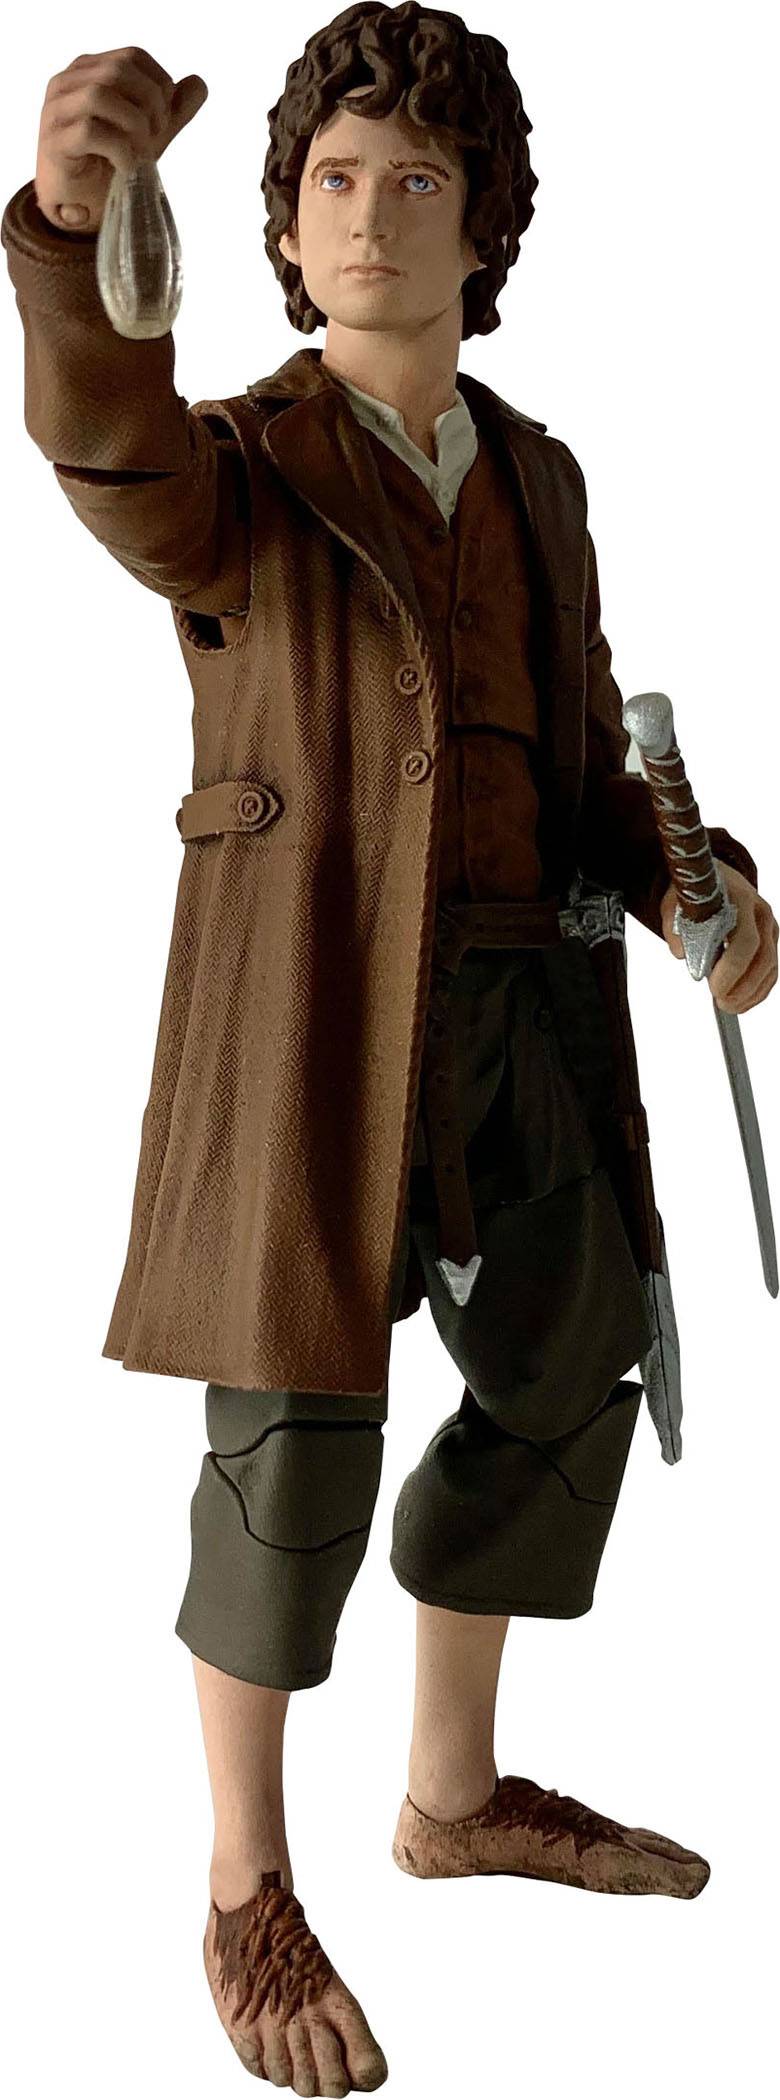 Lord Of The Rings Deluxe Series 2 Frodo Figure